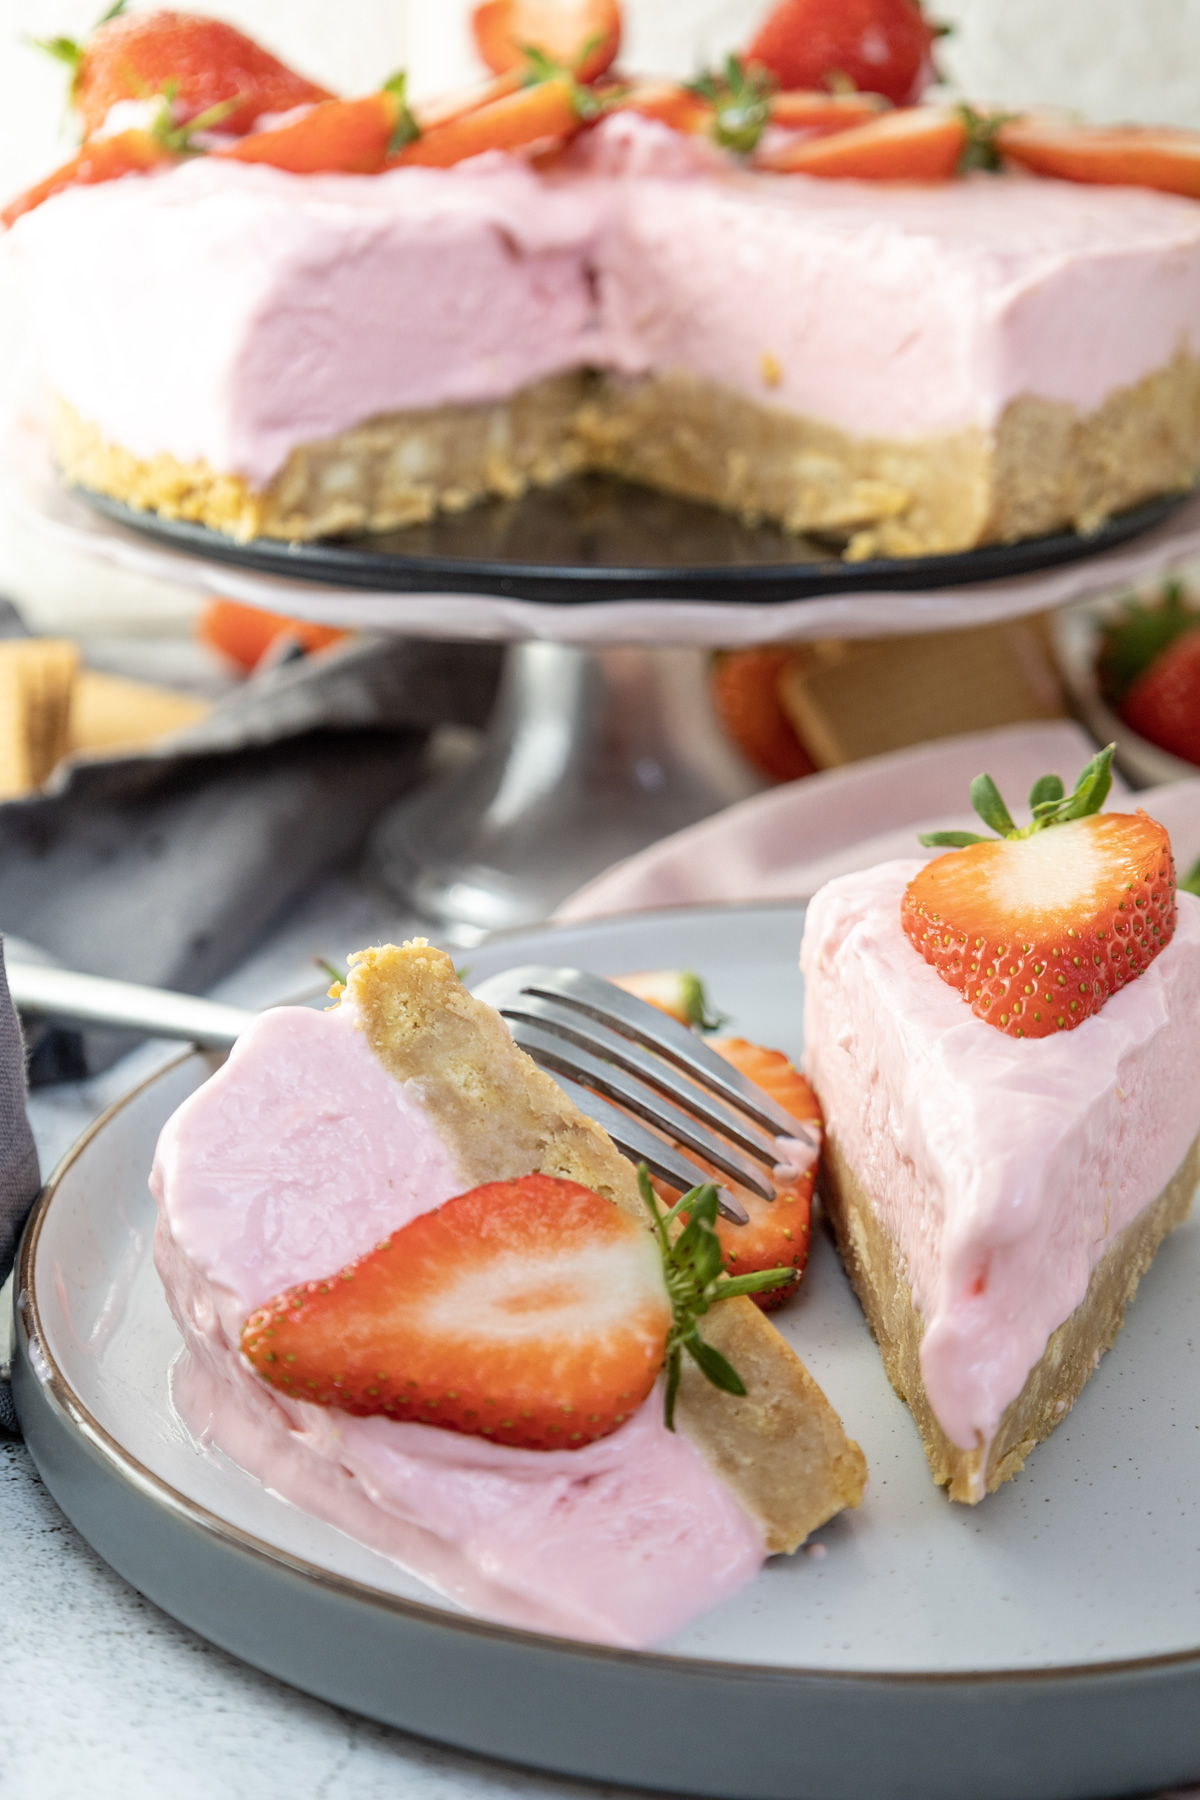 two slices of strawberry cheesecake on a plate